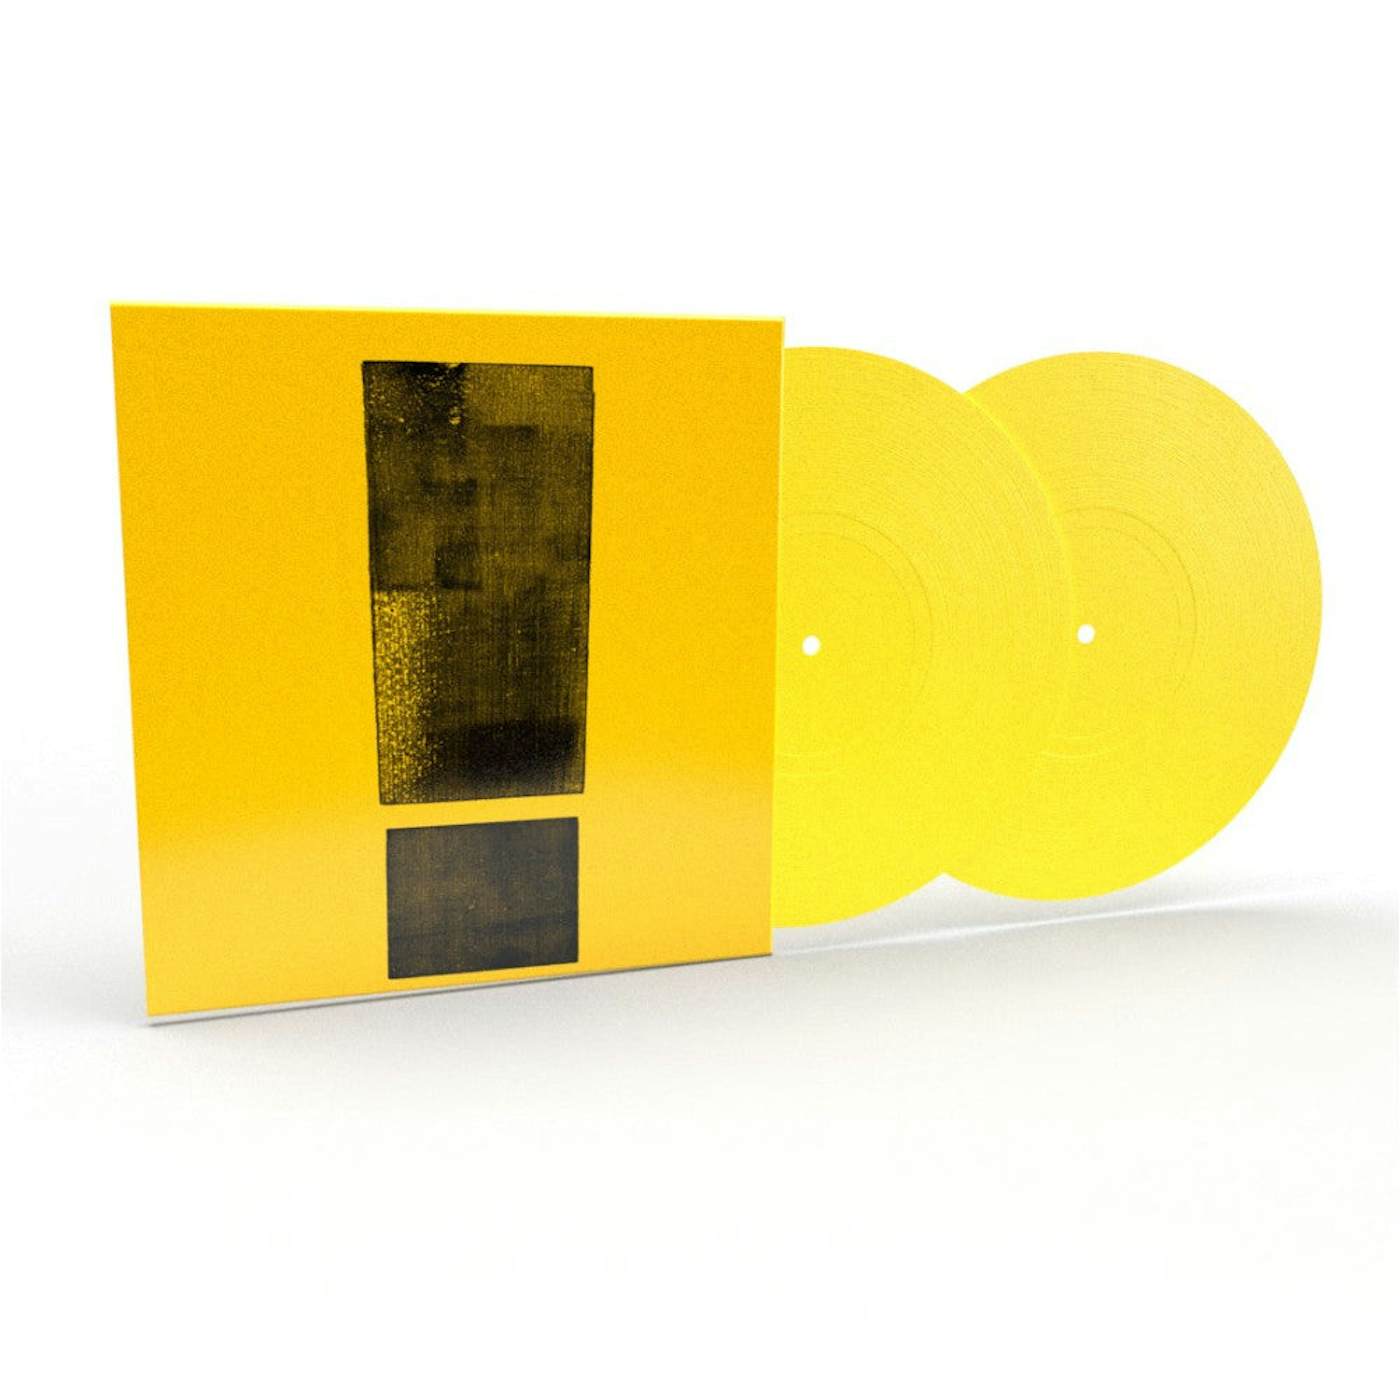 Shinedown ATTENTION ATTENTION (Clear Yellow Vinyl)